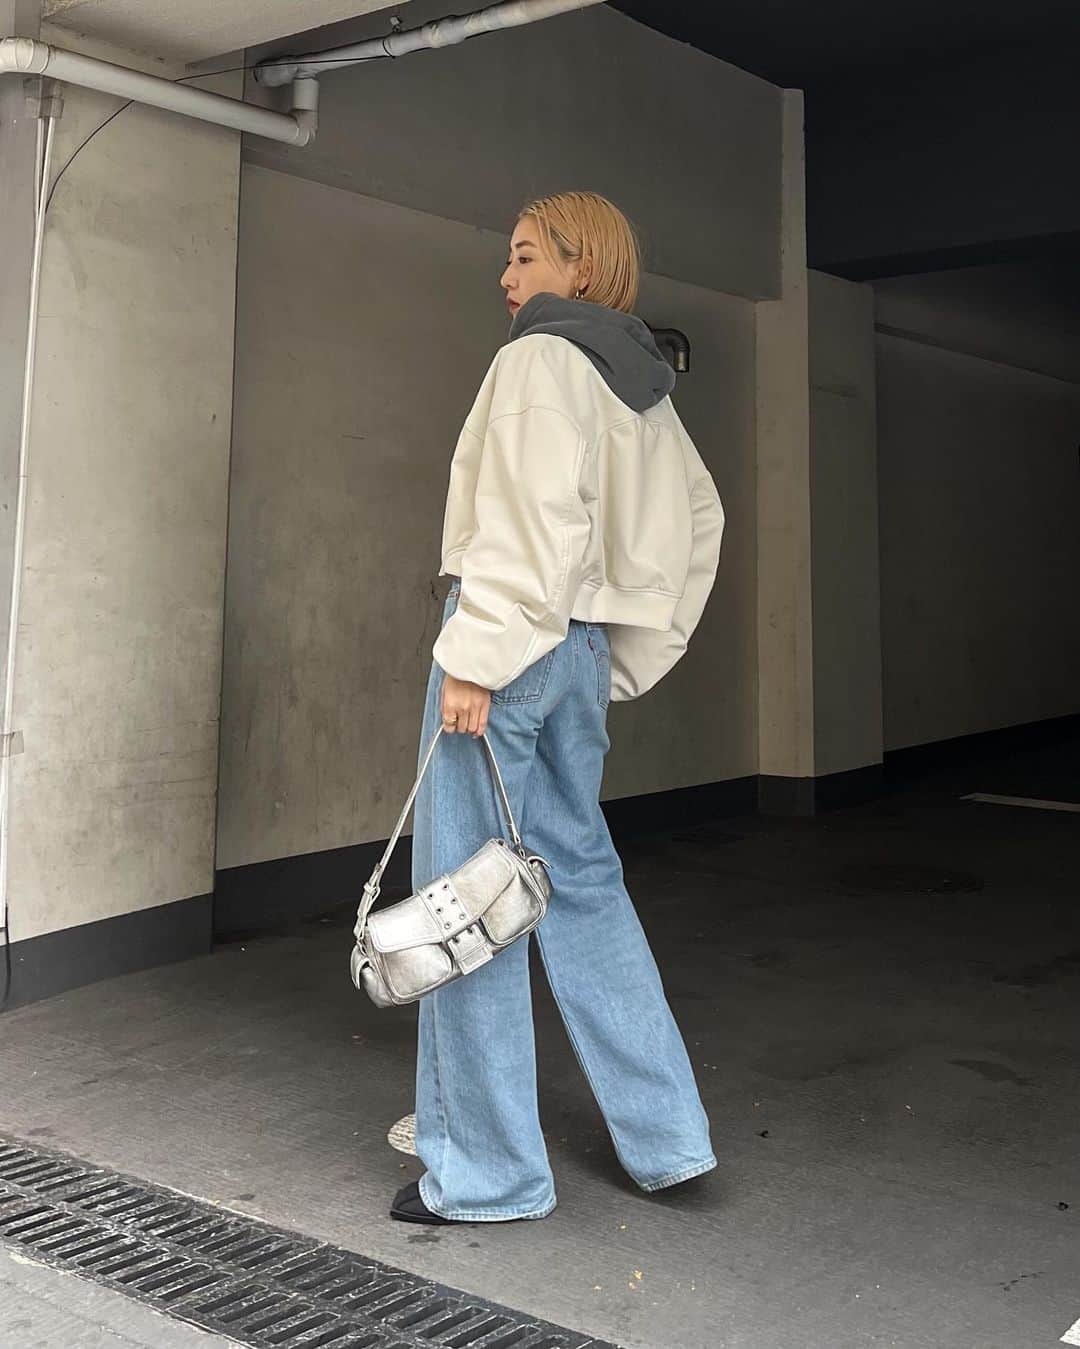 SLY OFFICIAL INFORMATIONさんのインスタグラム写真 - (SLY OFFICIAL INFORMATIONInstagram)「ㅤㅤㅤㅤㅤㅤㅤㅤㅤㅤㅤㅤㅤ #SLY_info @momoka_suda_【158cm】 SLY プレス __________________________________ 【LIMITED ITEM】 ☑︎F／LEATHER SEAM DESIGN CROP BZ (030GA030-5270) IVOY,BLK ㅤㅤㅤㅤㅤㅤㅤㅤㅤㅤㅤㅤㅤ ☑︎CROP SW ZIP PK (030GA080-4140) L/BLK,L/YEL ㅤㅤㅤㅤㅤㅤㅤㅤㅤㅤㅤㅤㅤ ☑︎LEVI’S別注 RIBCAGE WIDE LEG (030GAA01-4650) BLU ㅤㅤㅤㅤㅤㅤㅤㅤㅤㅤㅤㅤㅤ ☑︎FRONT BUCKLE HOBO BAG (030GAA55-4610) SLV,BLK,BRN ㅤㅤㅤㅤㅤㅤㅤㅤㅤㅤㅤㅤㅤ ☑︎WOVEN FIT MIDDLE BOOTS (030GAY55-3720) KHA,BLK __________________________________ ※配送の都合により発売日が異なる場合がございます。 ※店舗により在庫状況が異なります。 #Levis_SLY #Levis #リーバイス #SLY #SLY_fav」11月17日 20時37分 - sly_official_info